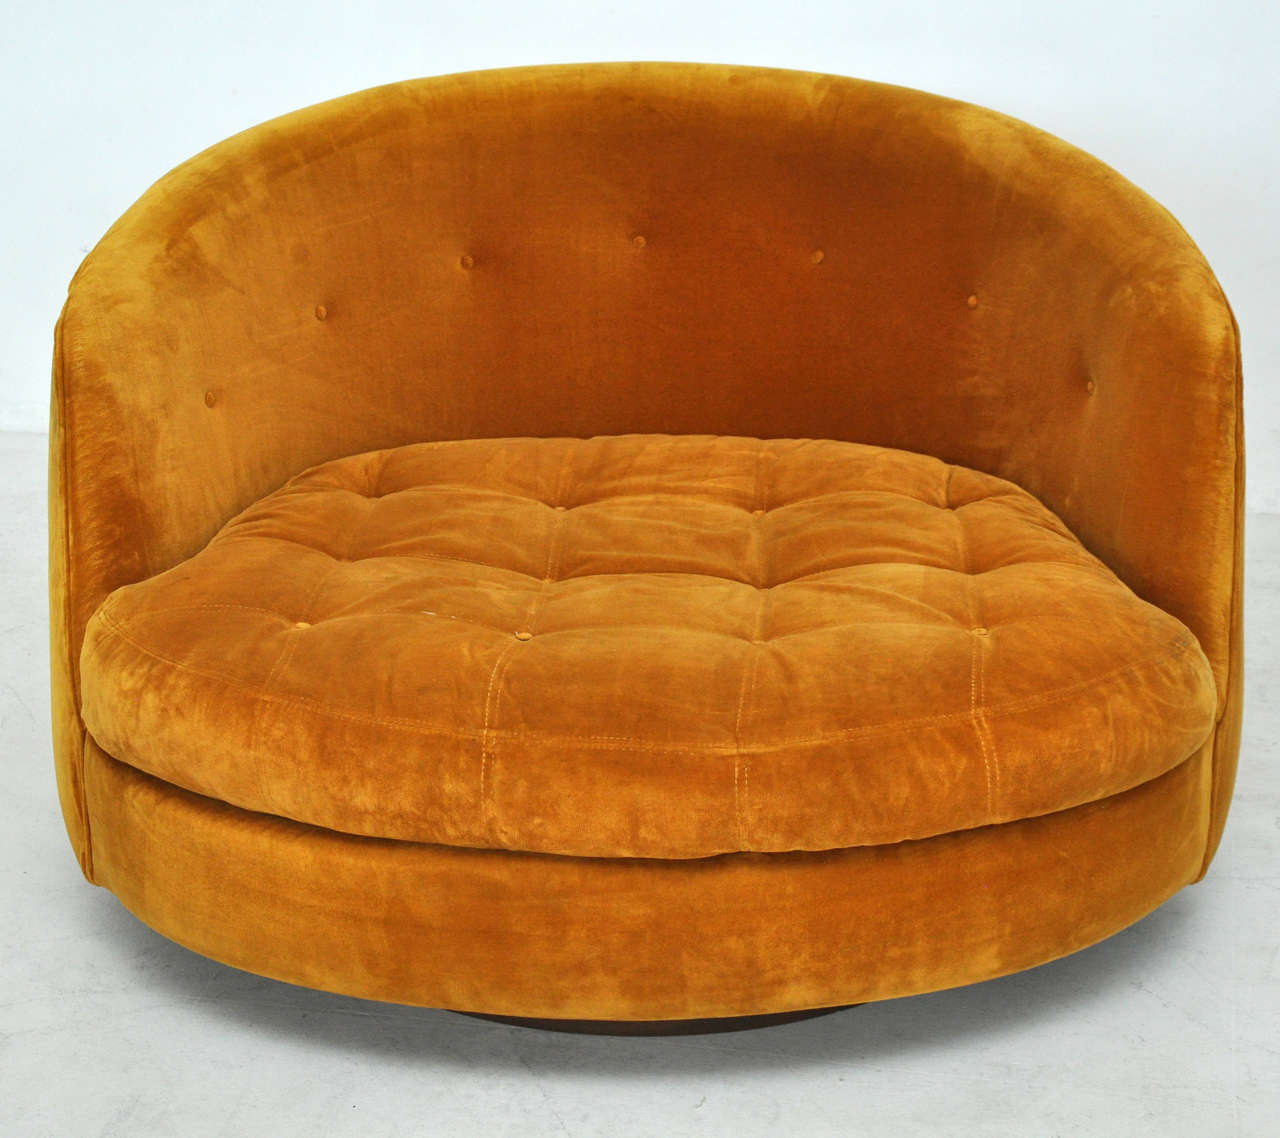 Milo Baughman Large Swivel Chair At 1stdibs, Large Round Leather Swivel Chair